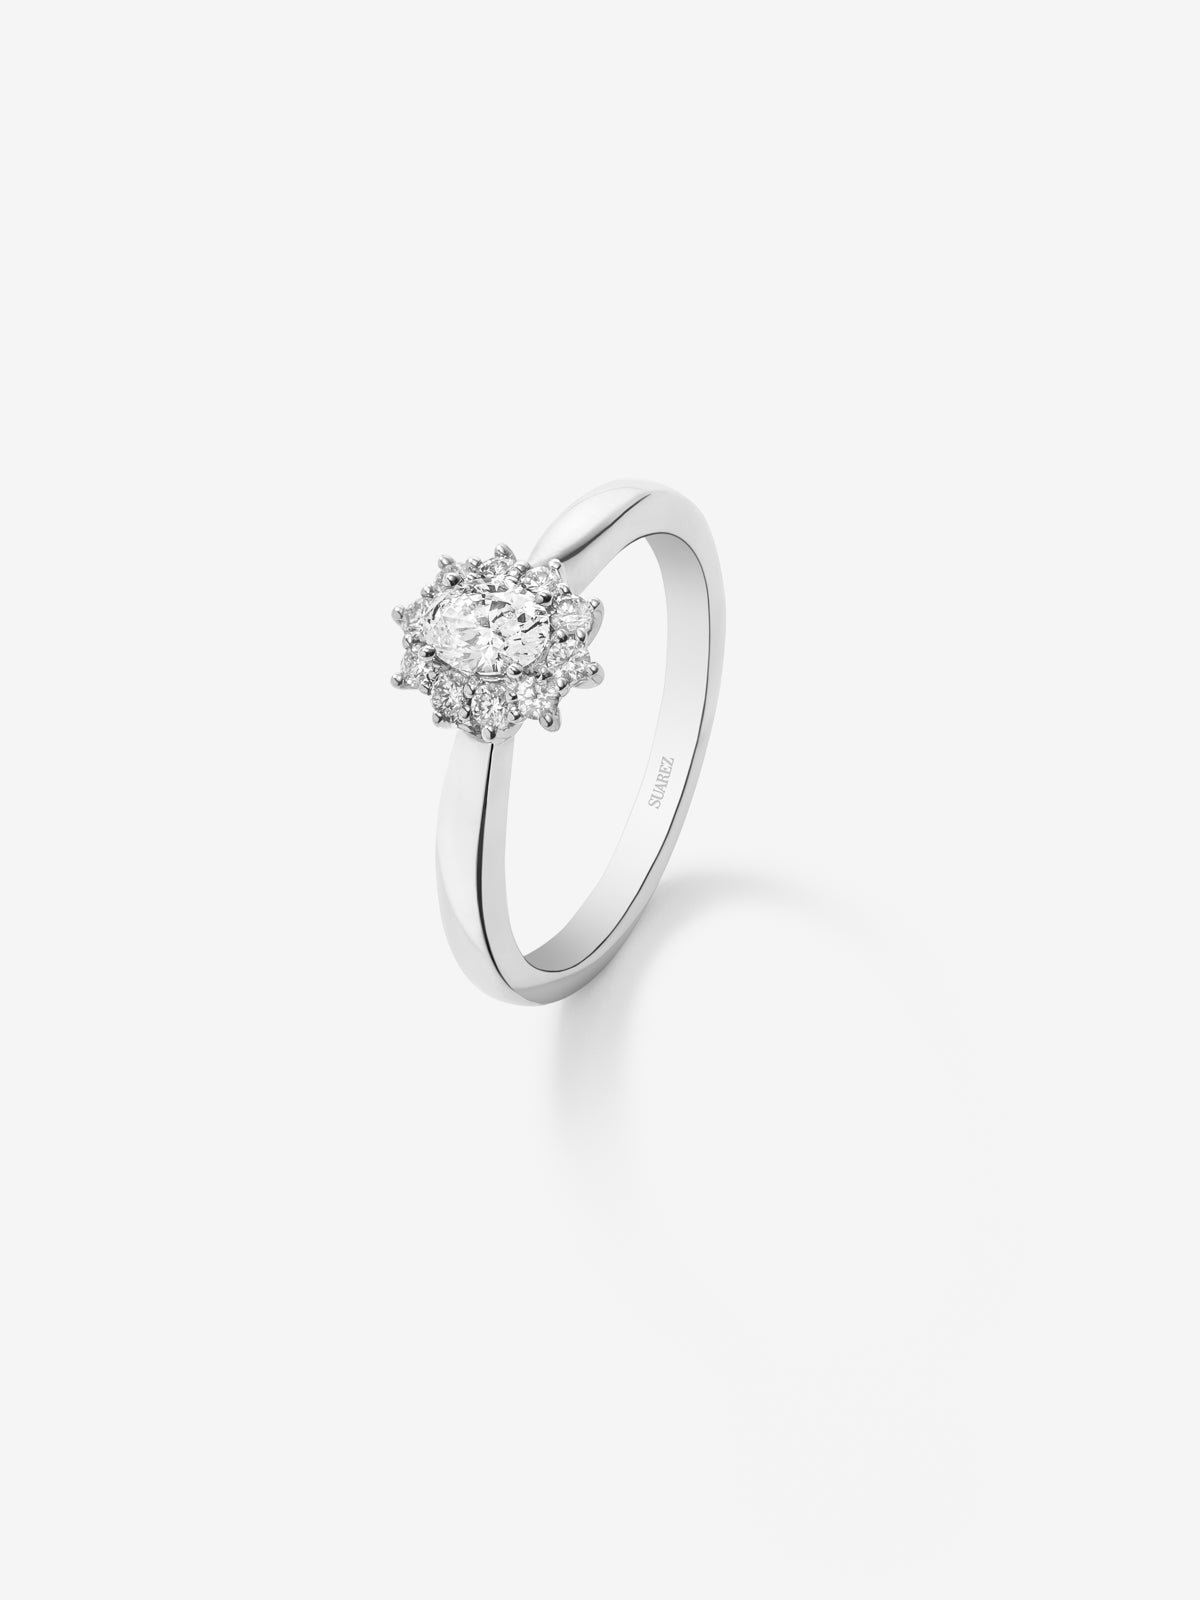 18K white gold ring with a central oval-cut white diamond of 0.3 cts and a border of 10 brilliant-cut diamonds with a total of 0.18 cts